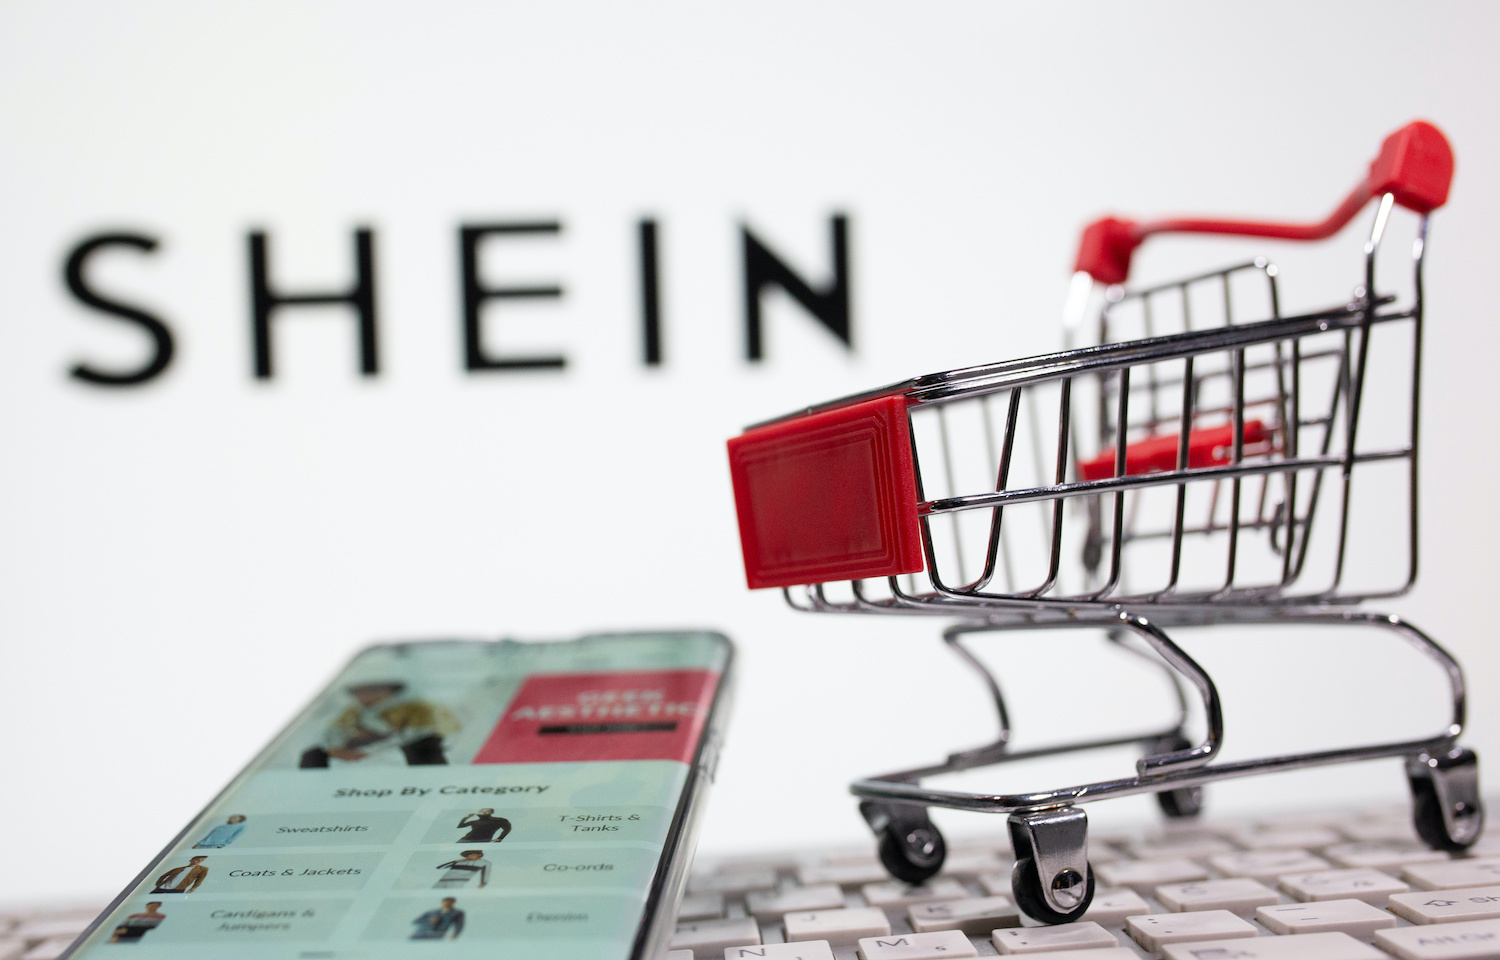 Chinese Fashion Retailer Shein Accused Over Factory Certification Claims - Asia Financial News 